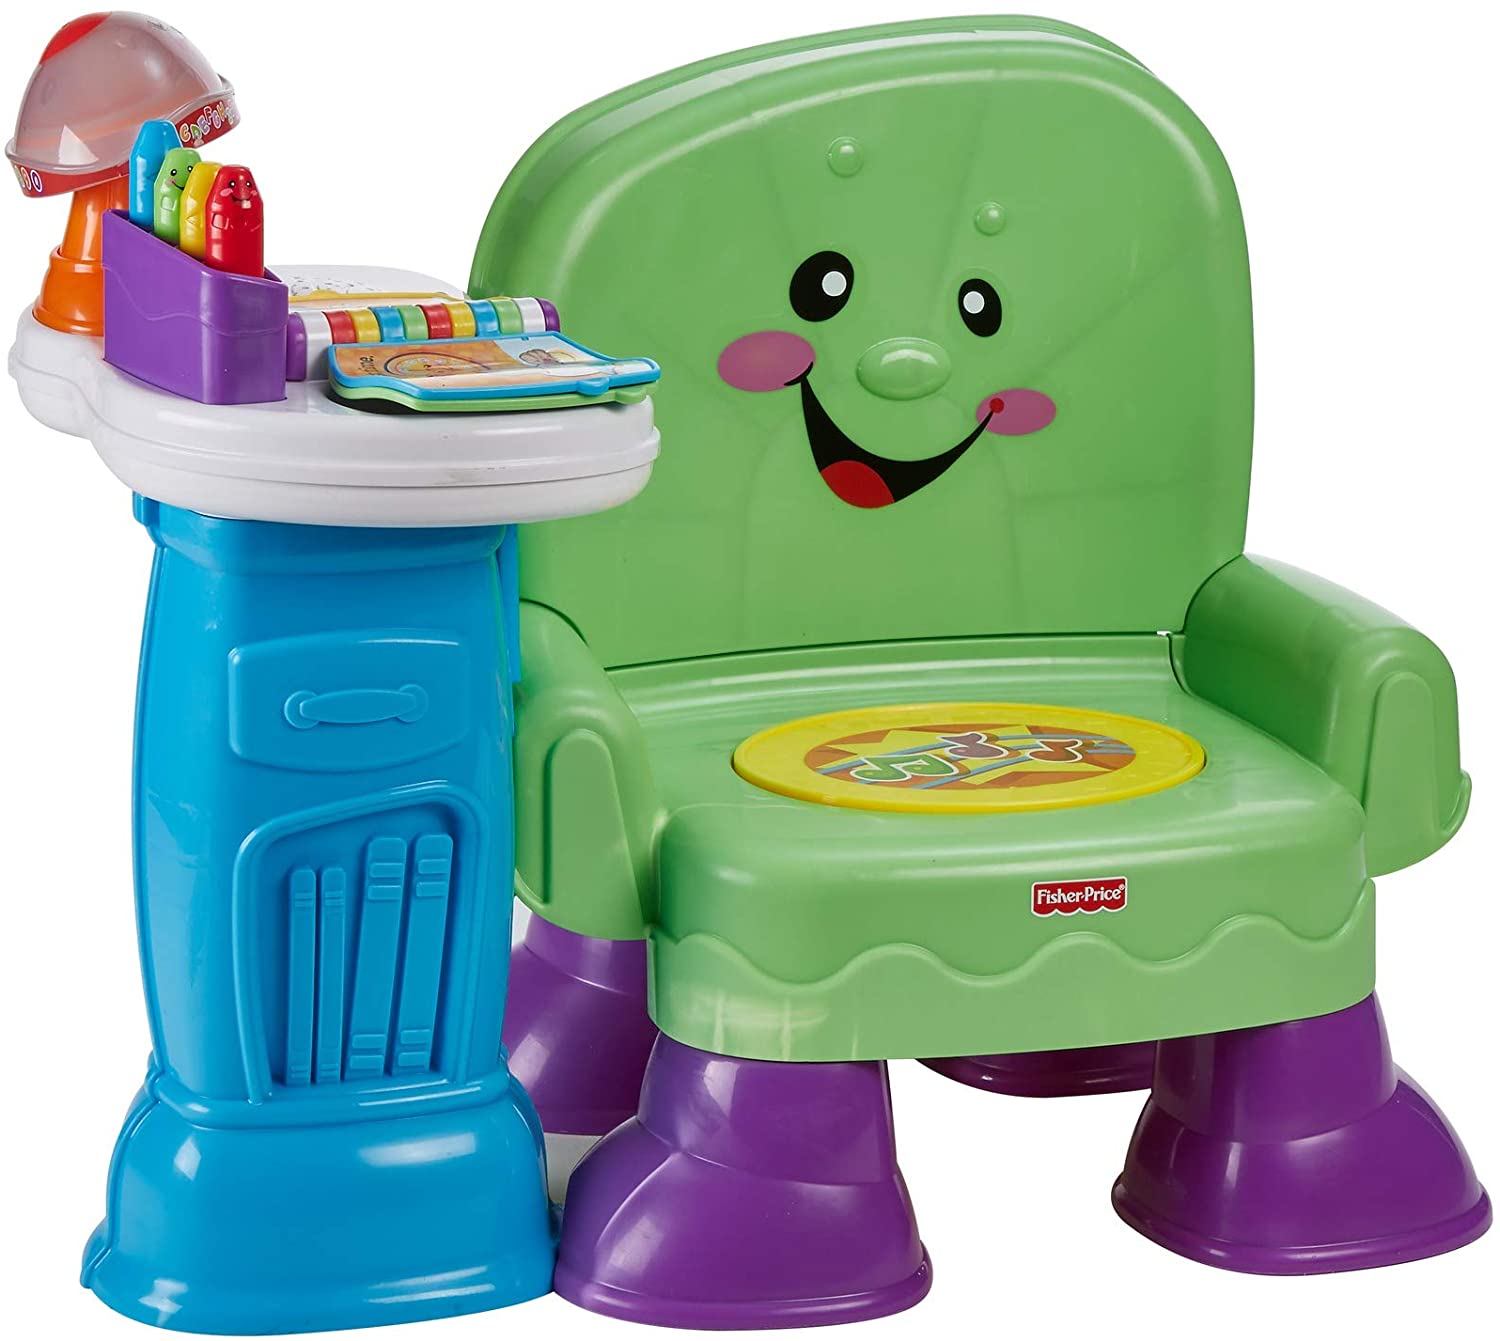 Fisher-Price Laugh & Learn Toddler Interactive Song & Story Learning Chair $31.49 + Free Shipping